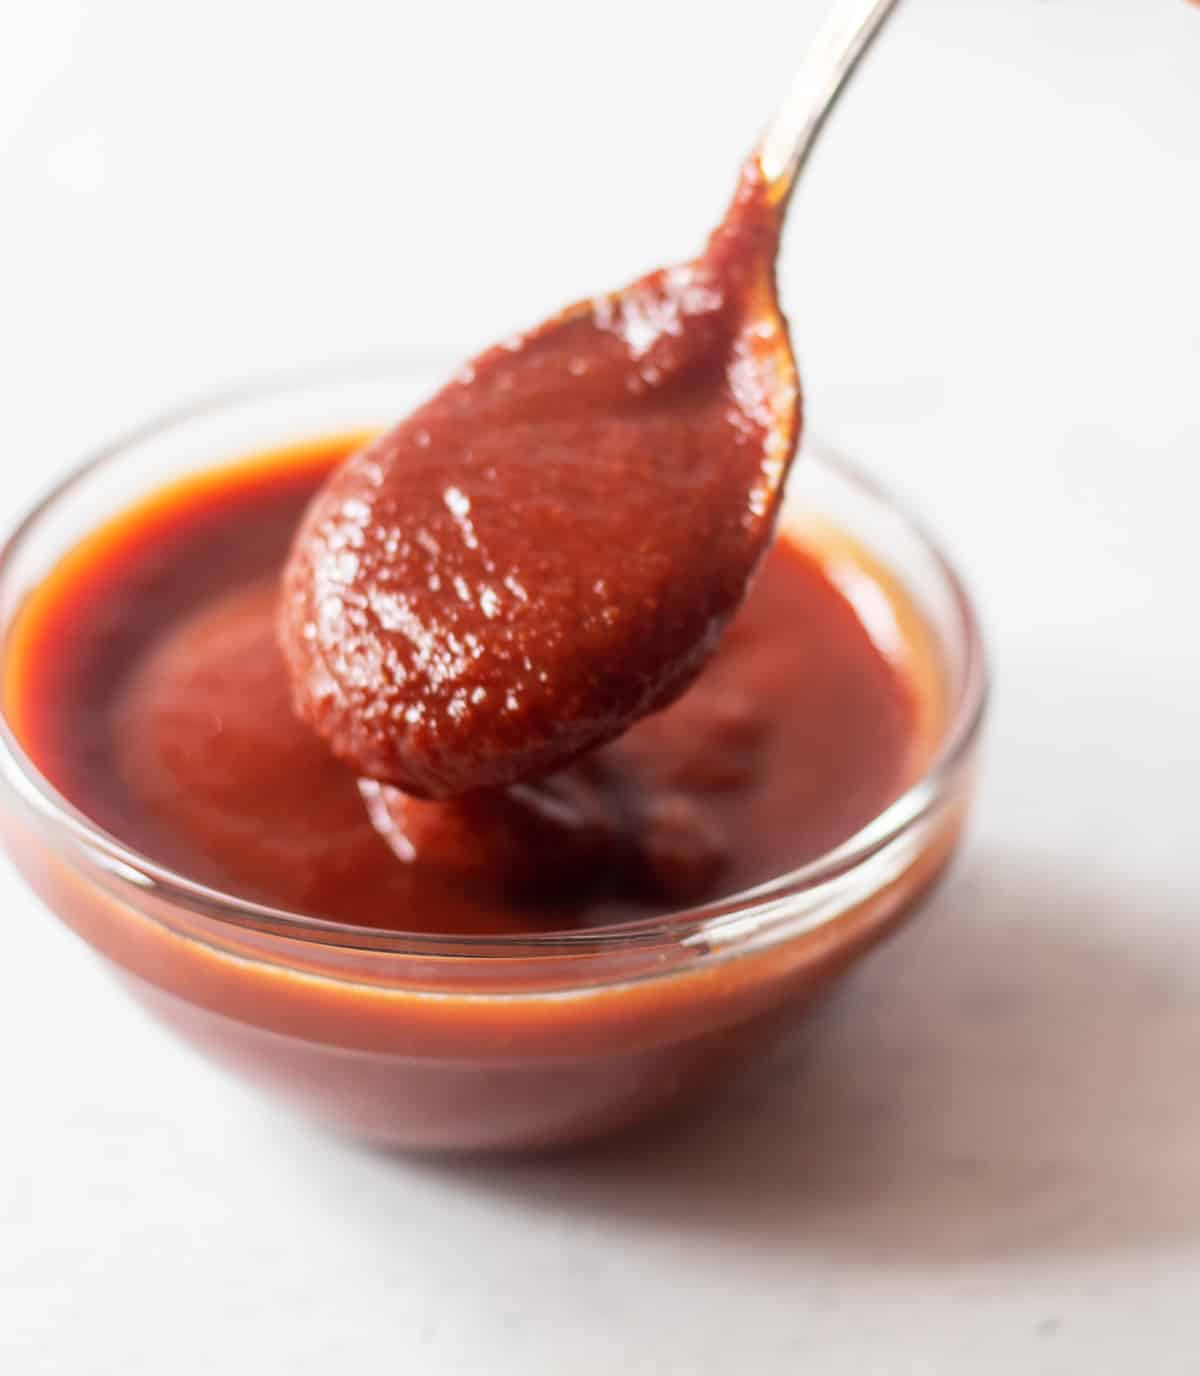 Homemade barbecue sauce in a clear glass bowl with a silver spoon scooping some out.